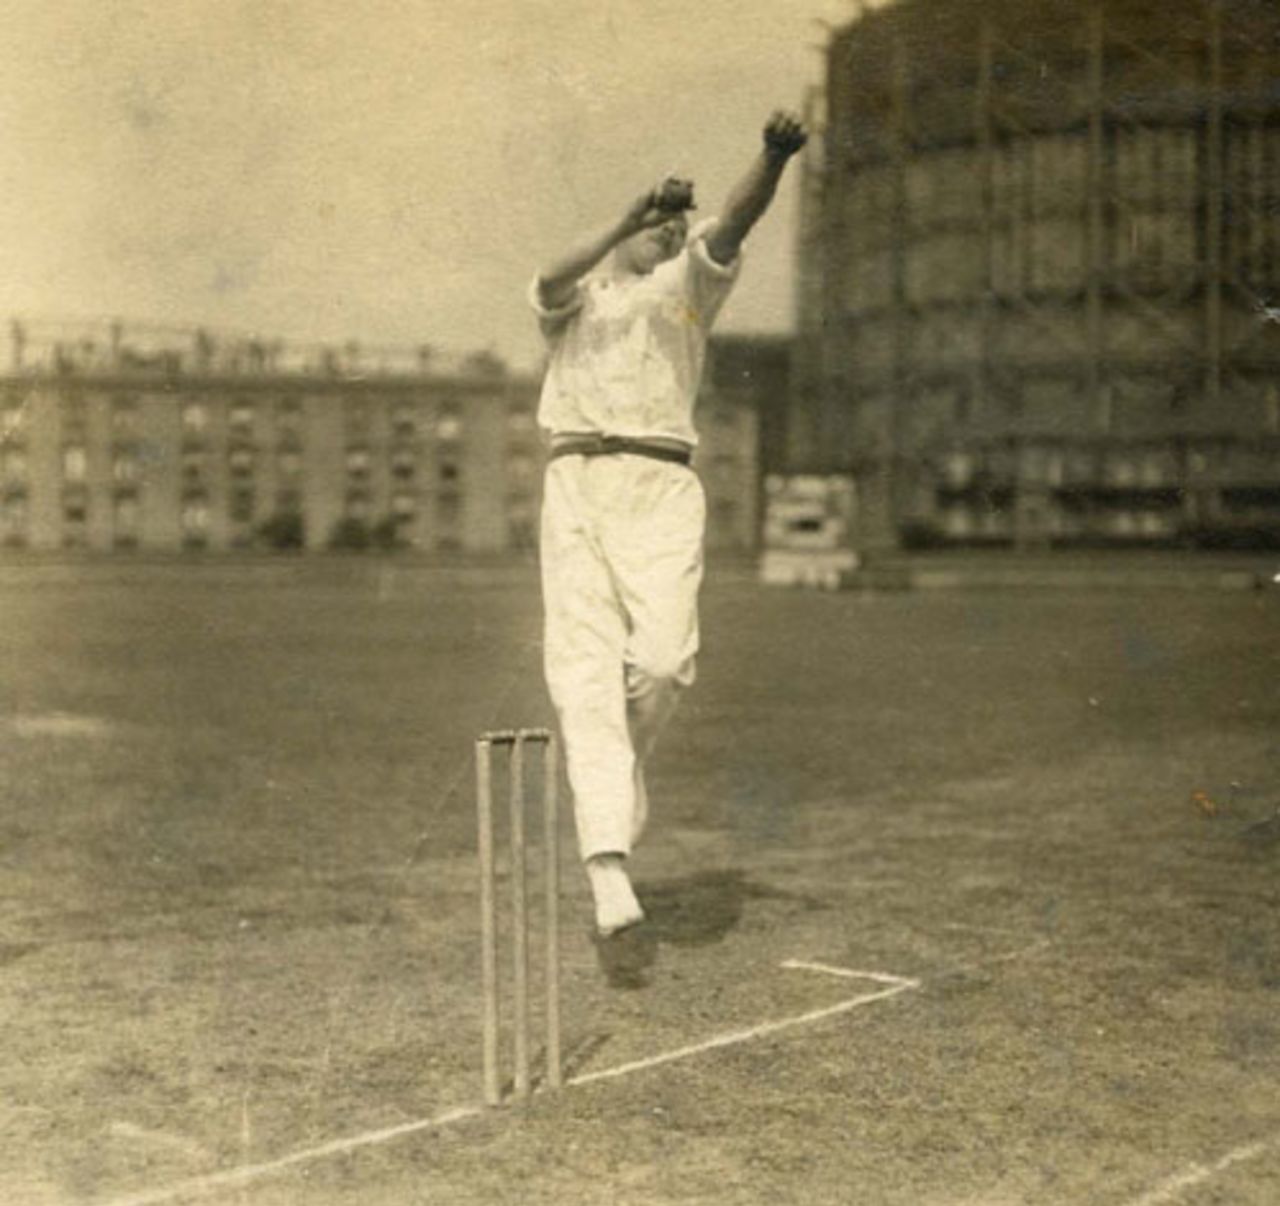 Bill Bradley in a posed shot at The Oval, circa 1900